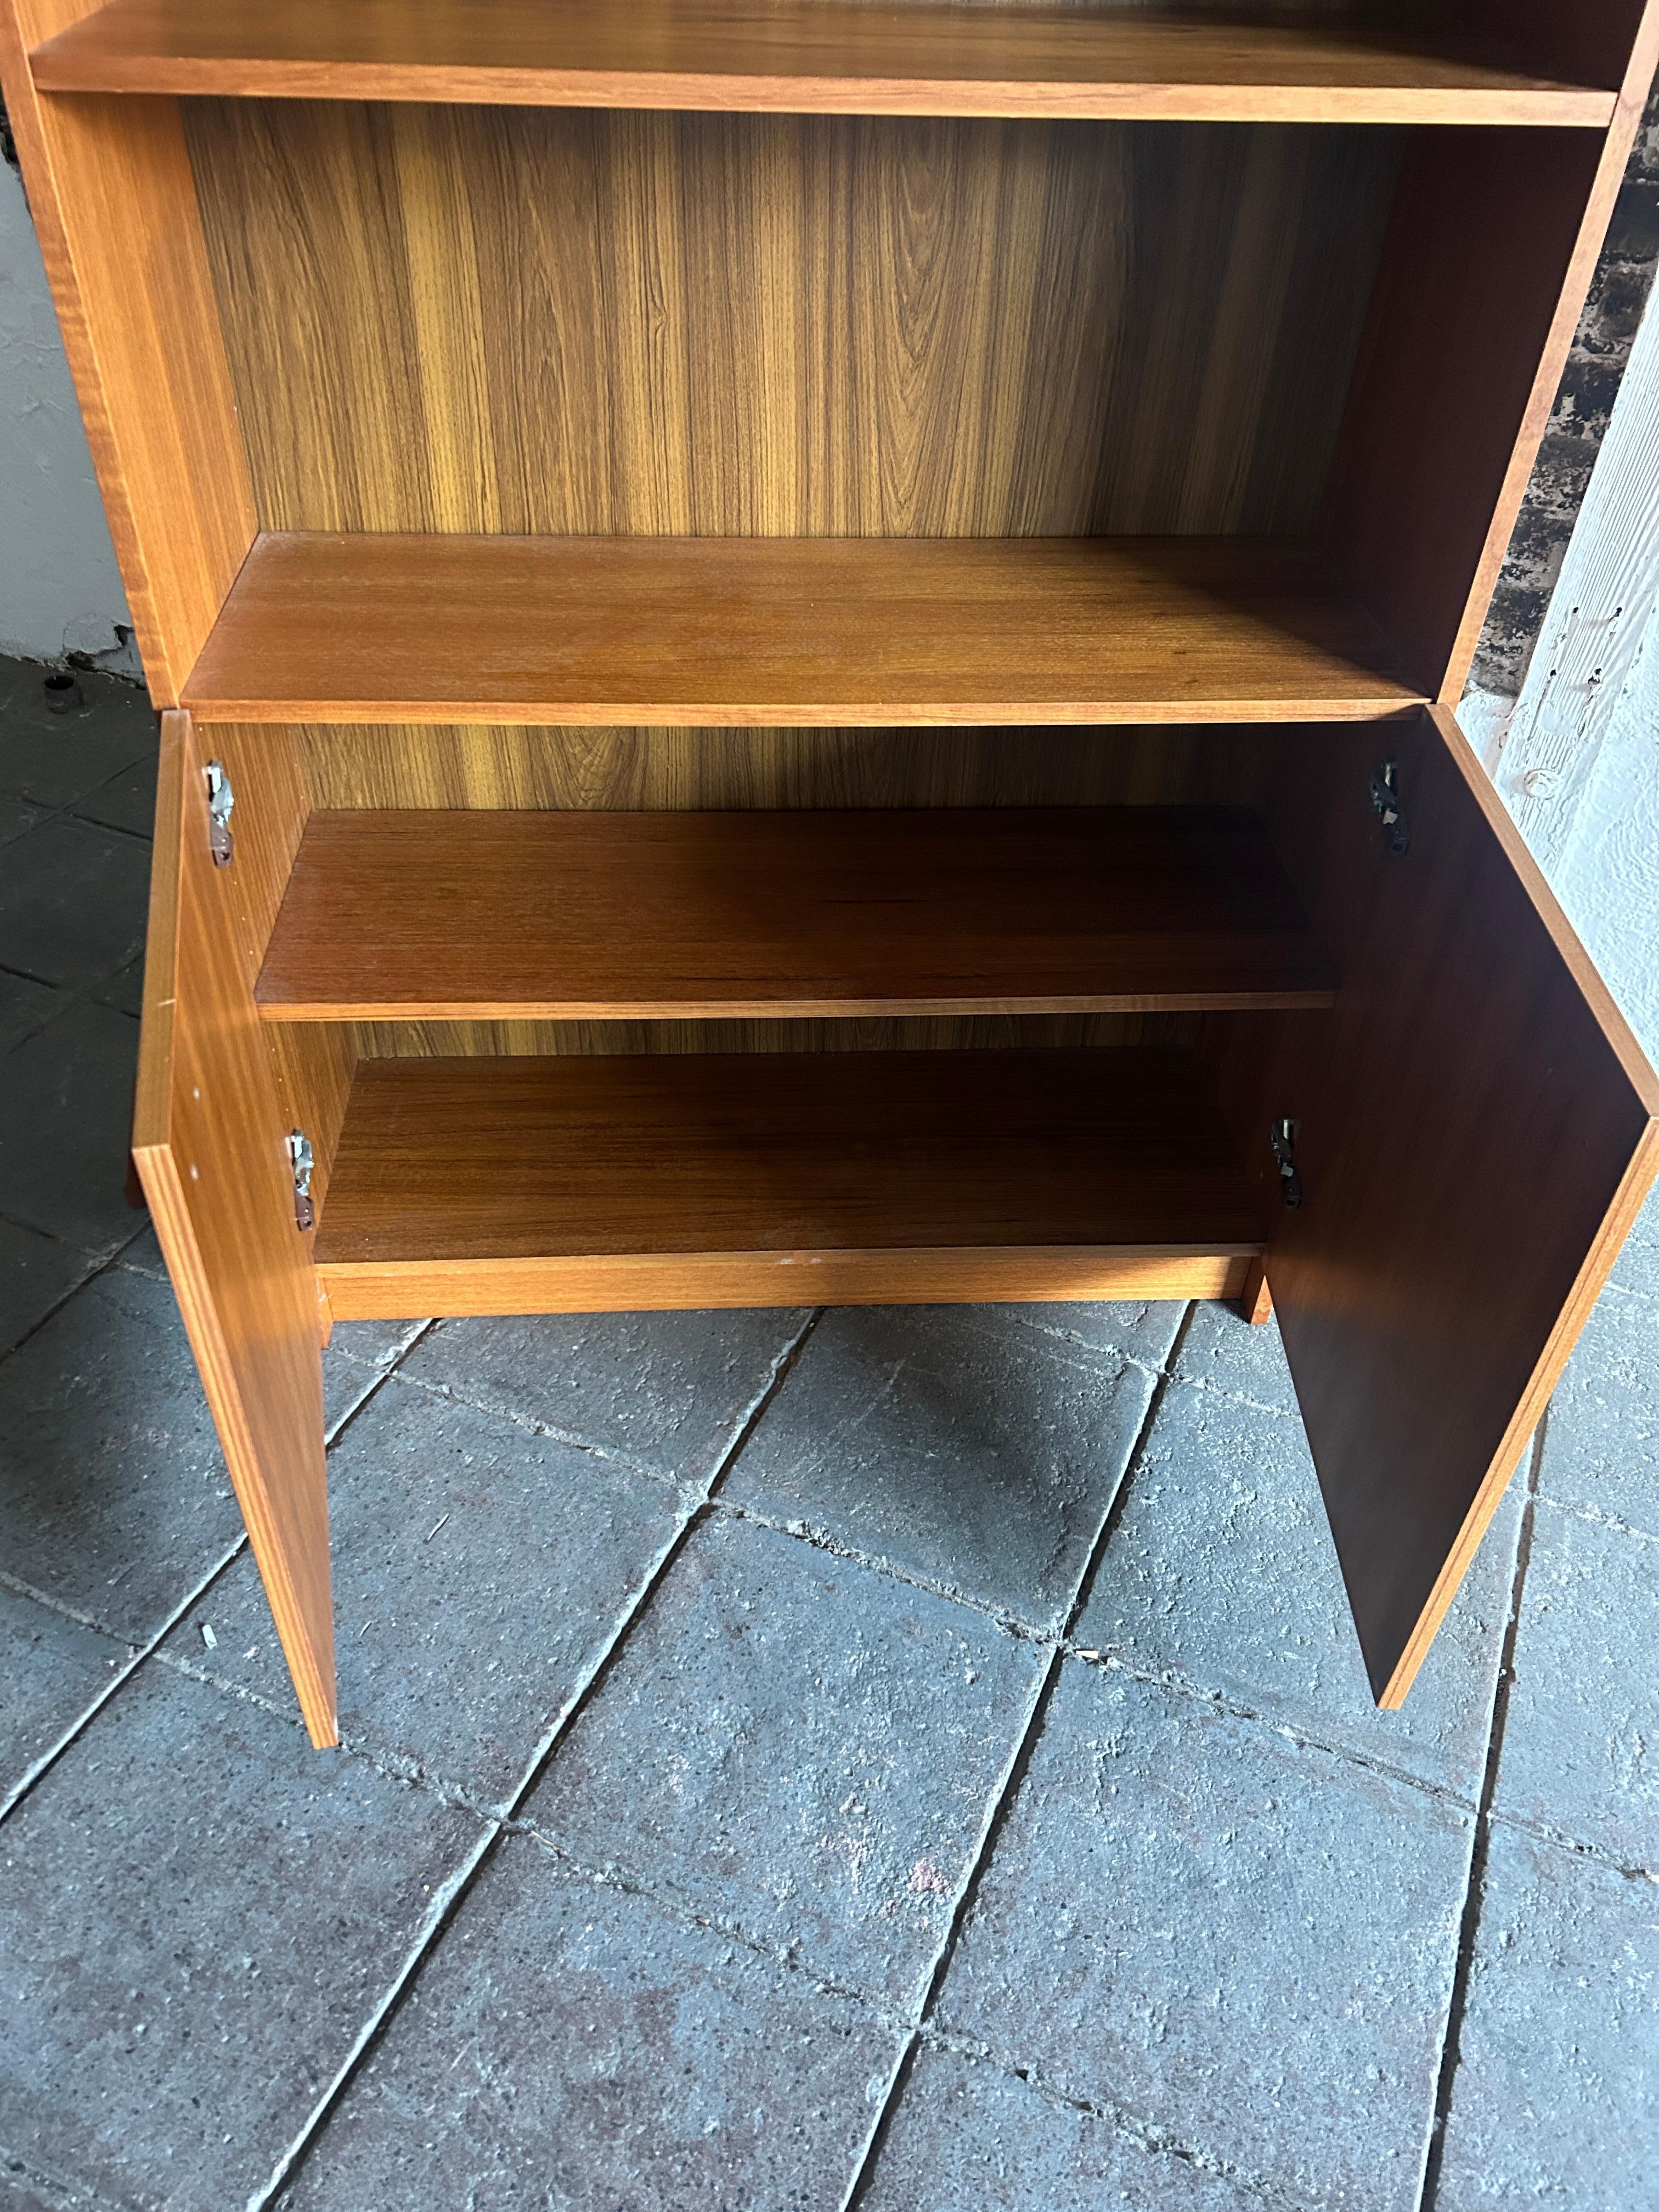 Mid-20th Century Mid-Century Modern wide teak tall bookcase (2) cabinet doors Made in Denmark  For Sale